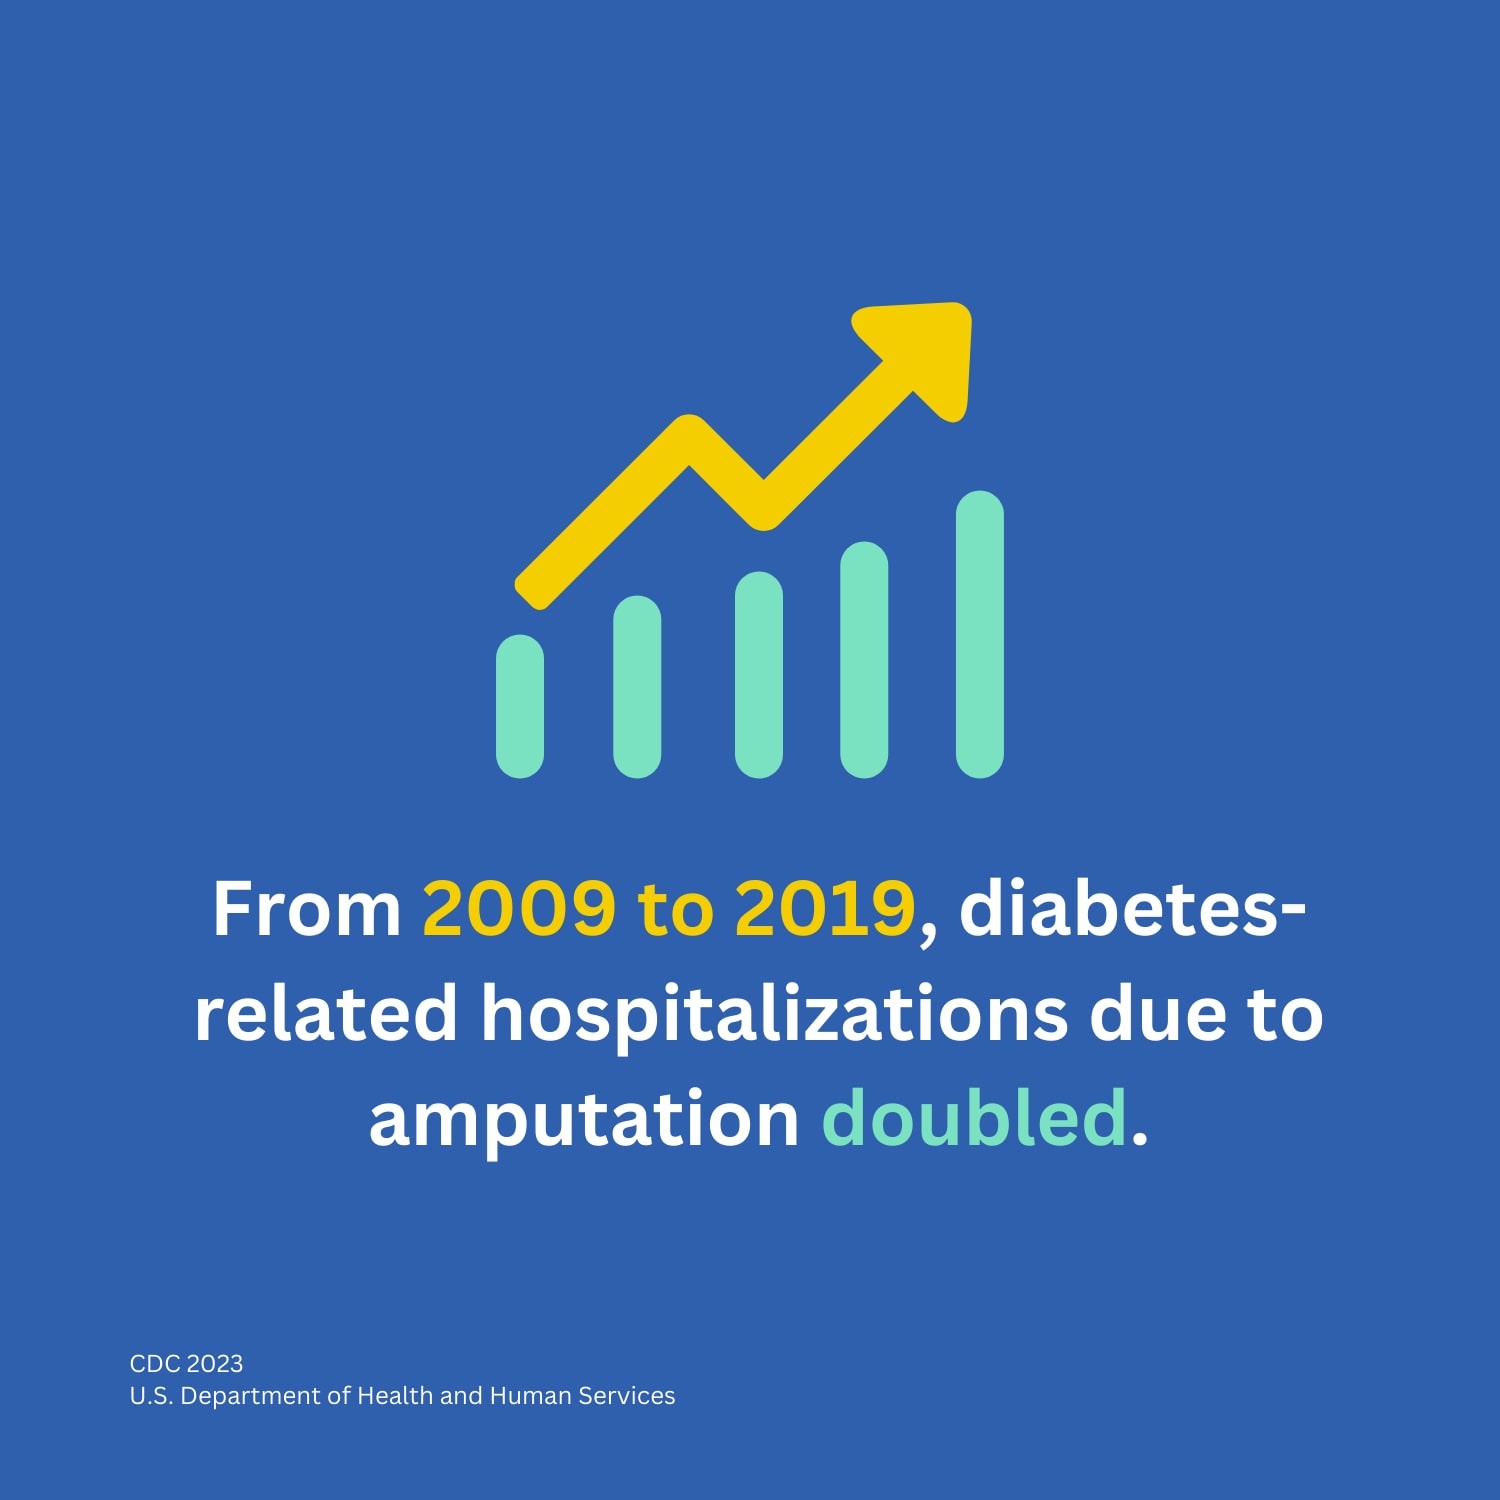 From 2009 to 2019, diabetes-related hospitalizations due to amputation doubled